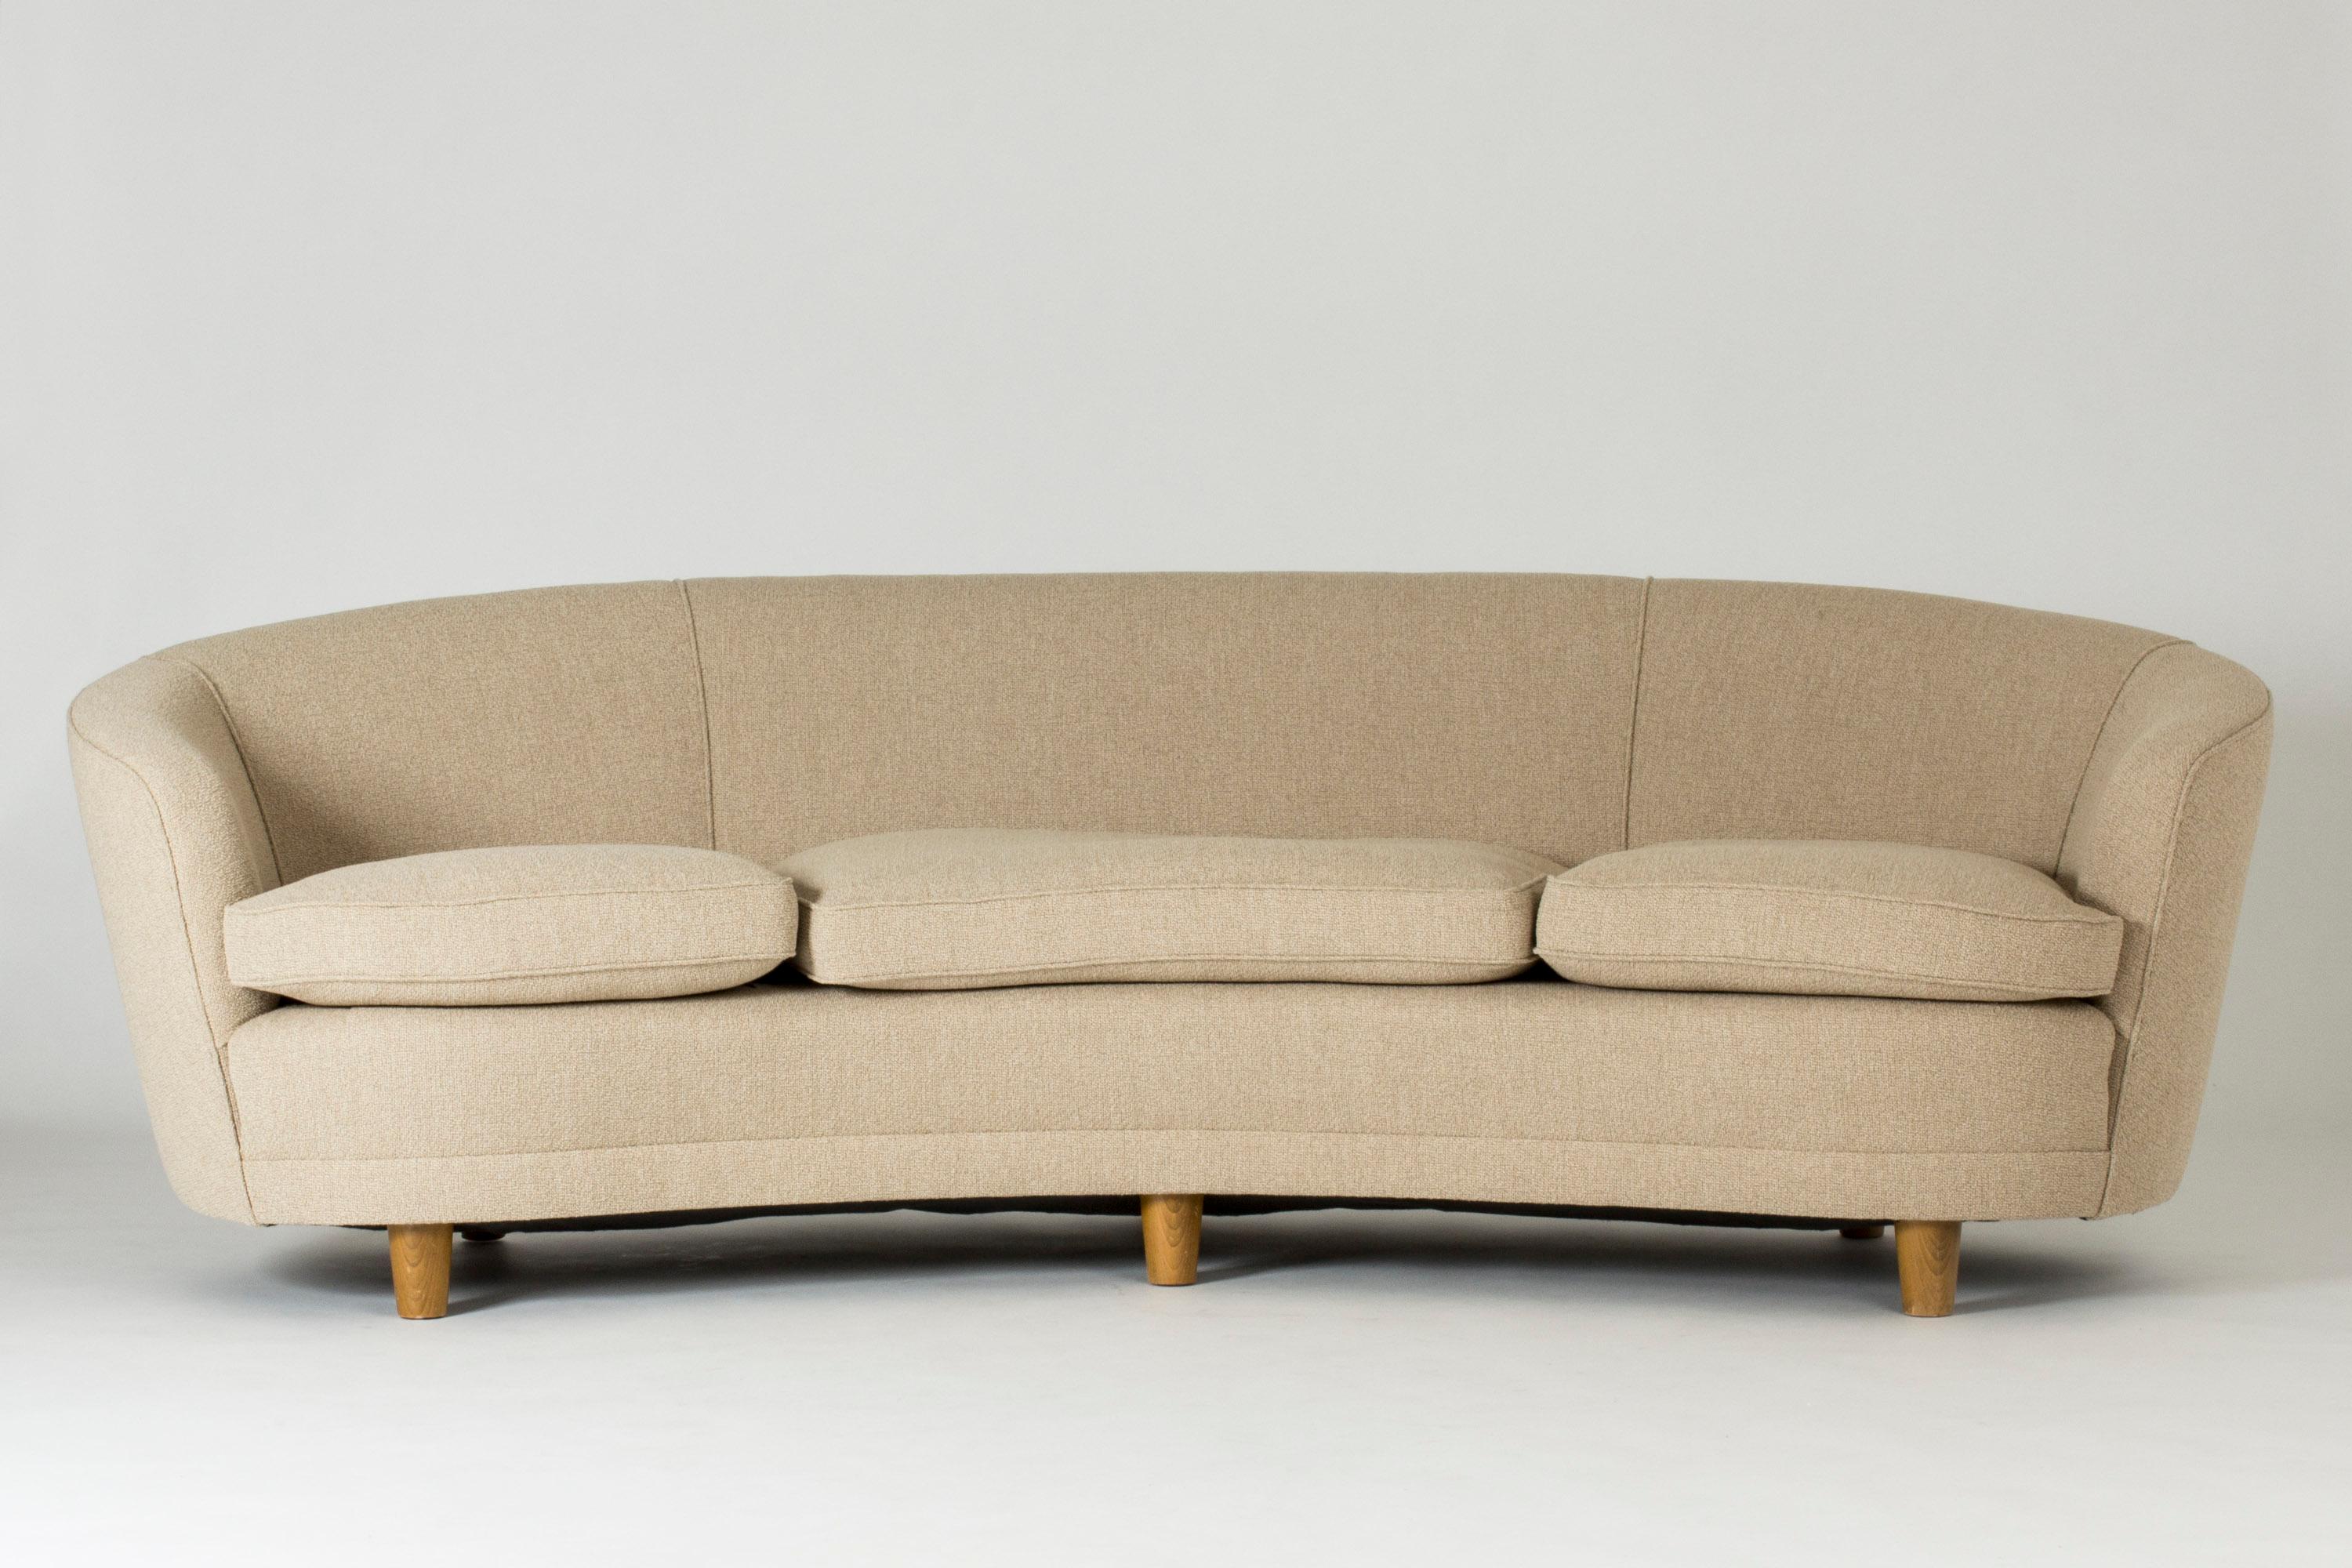 Large 1940s sofa, in a generous, curved design. Round, chunky wooden legs, bouclé fabric upholstery. Very elegant design, high quality and comfort.